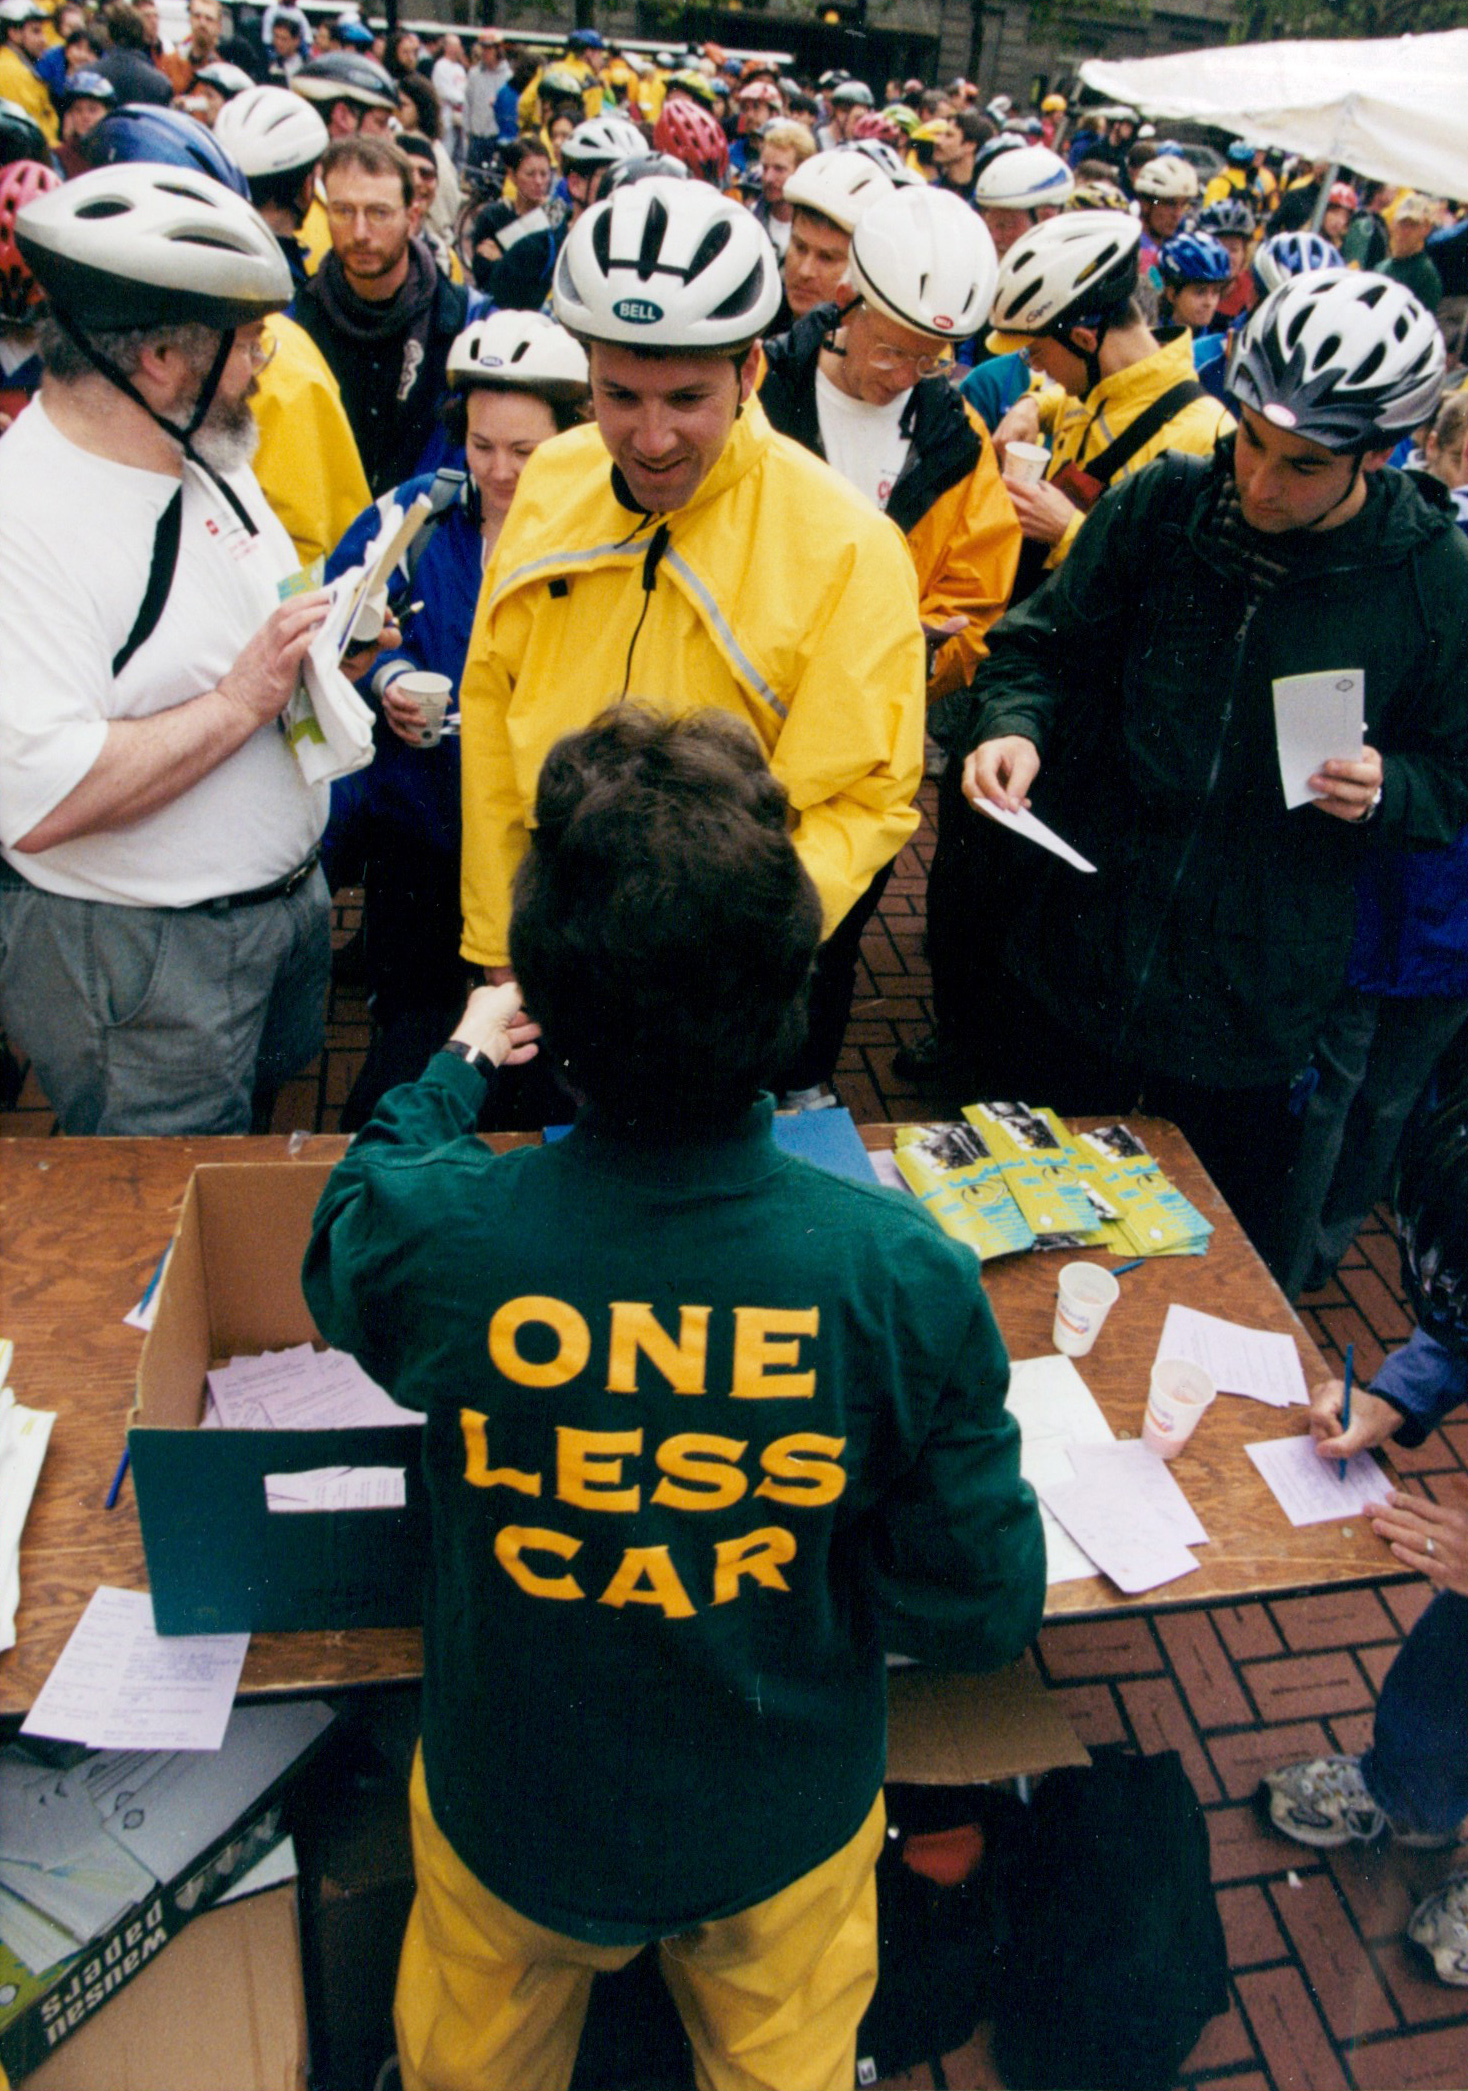 A large group of many people wearing bike helmets. There are so many it is hard to distinguish between them. They are facing a table with a variety of literature on it, but none of the titles or words on the literature are visible. One person stands on the near side of the table, facing all the bicyclists. The person is wearing a jacket that reads "One Less Car"